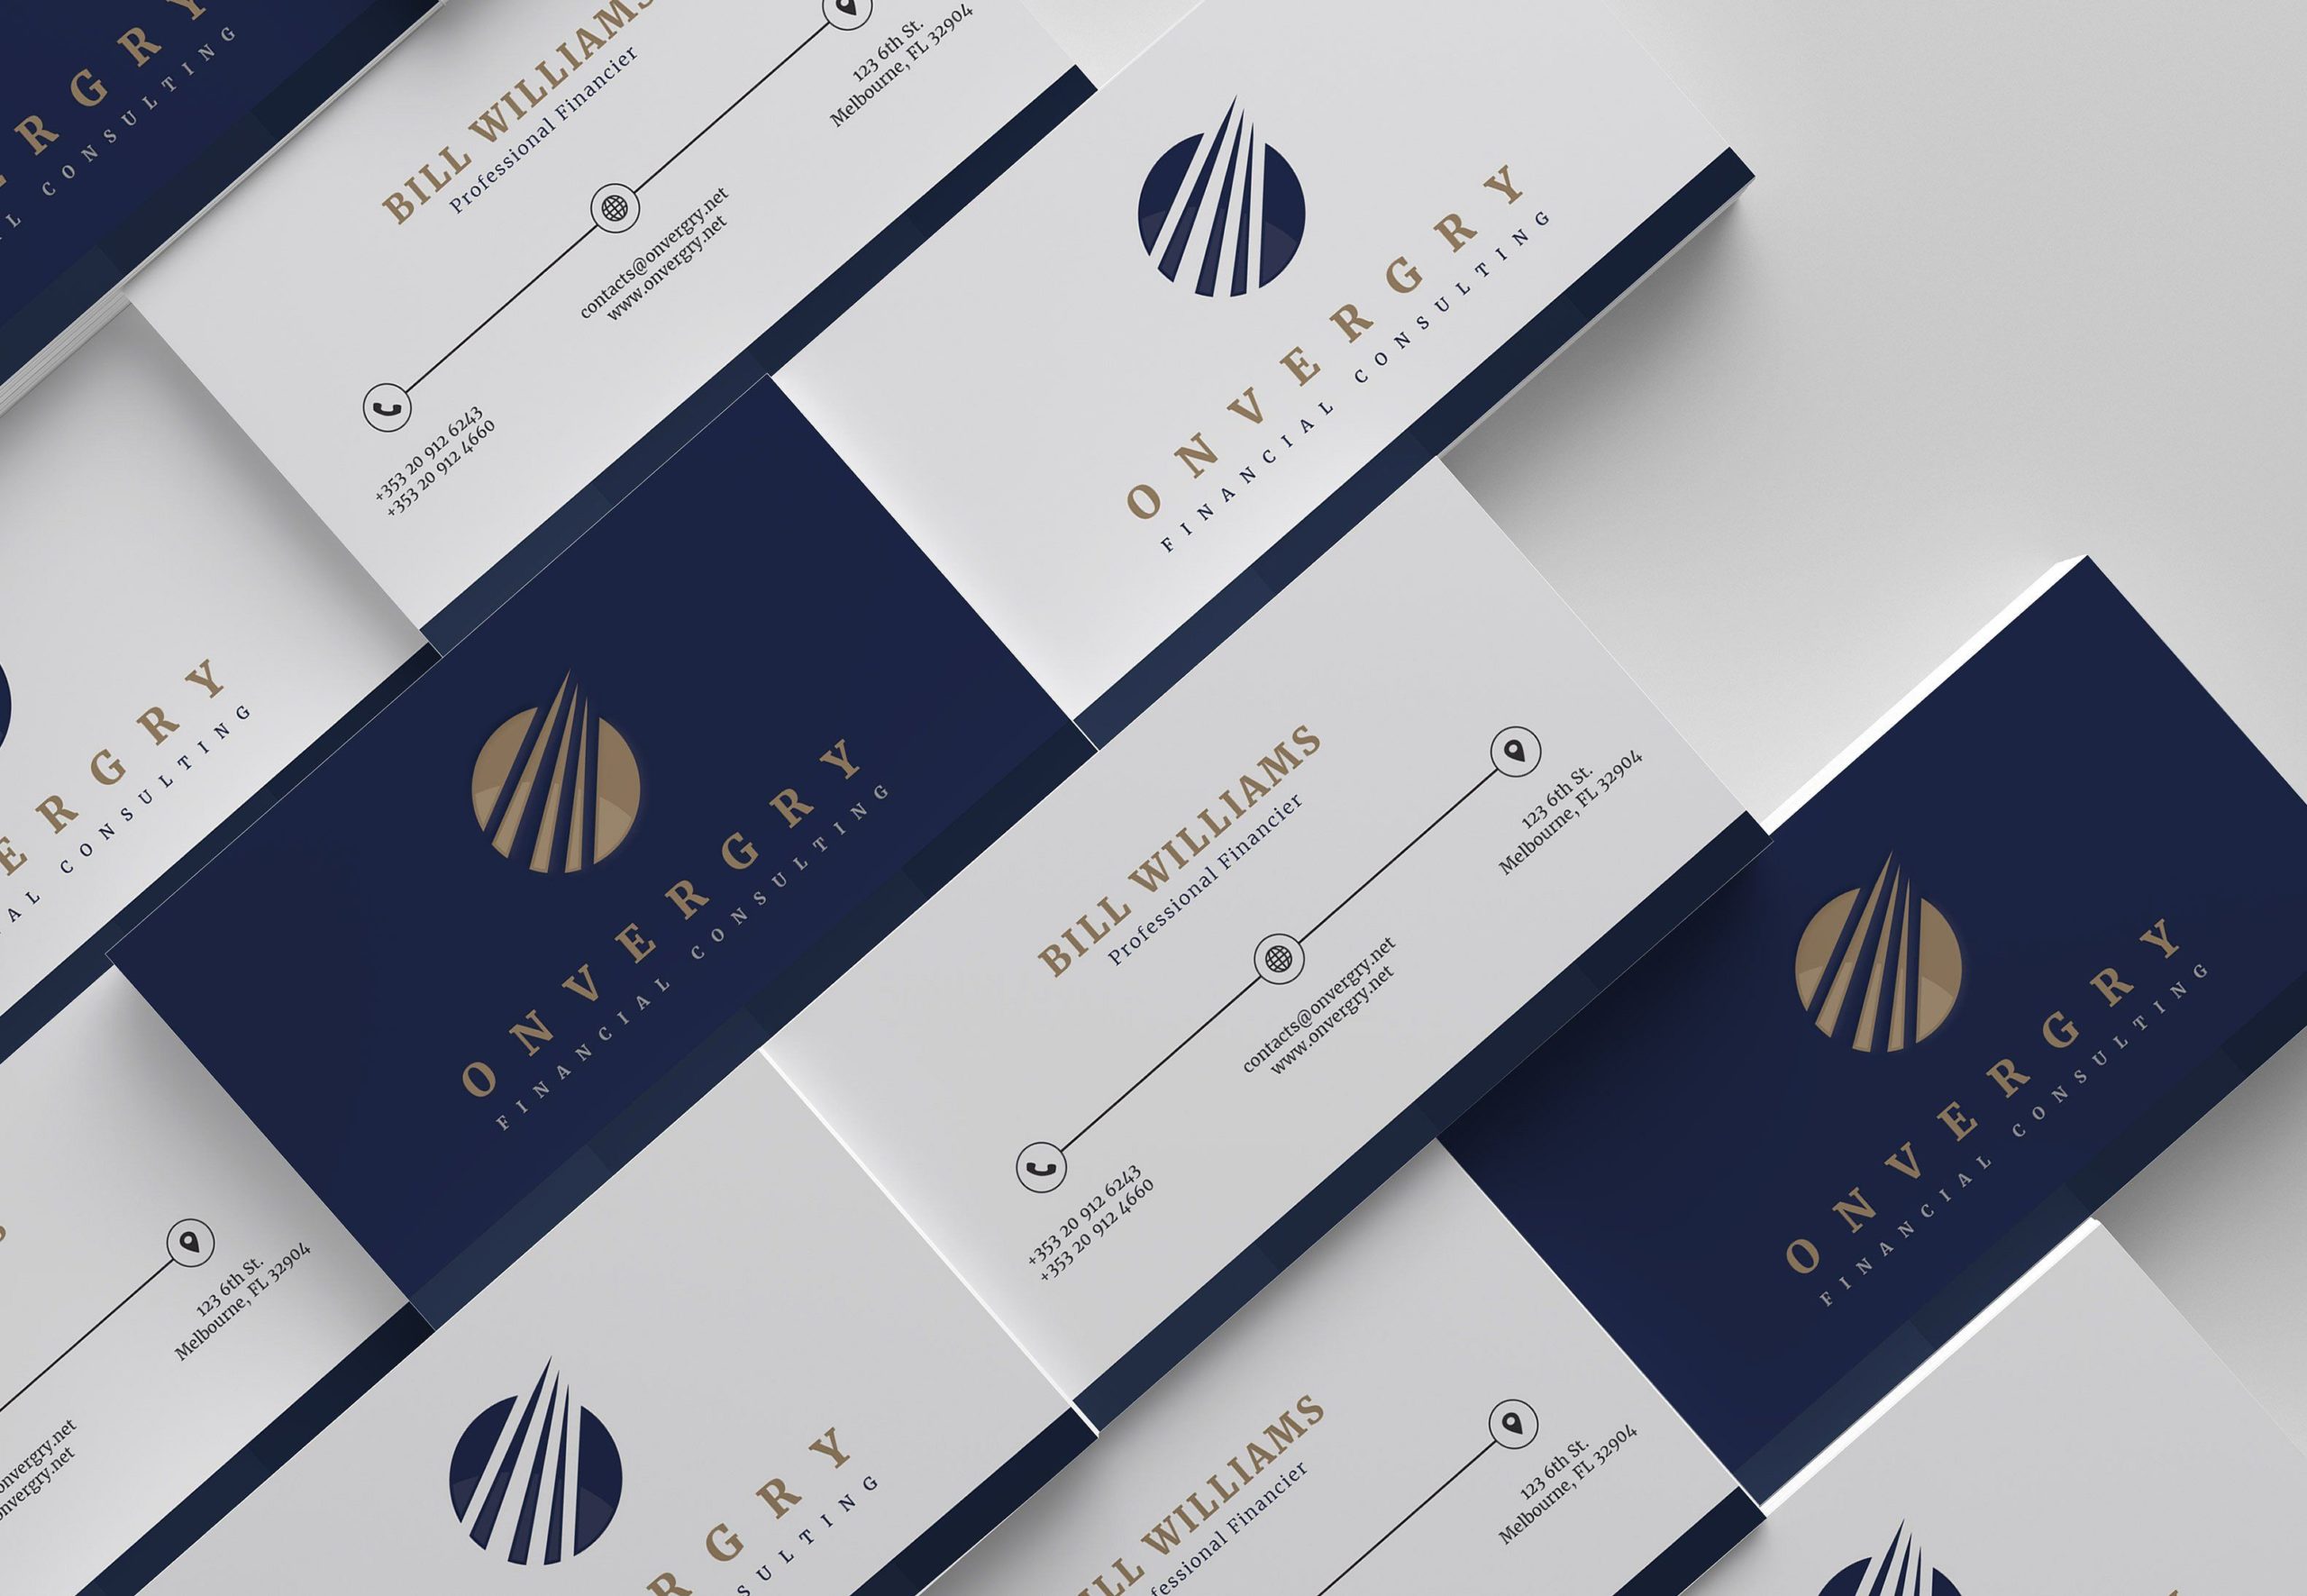 financial business cards 2